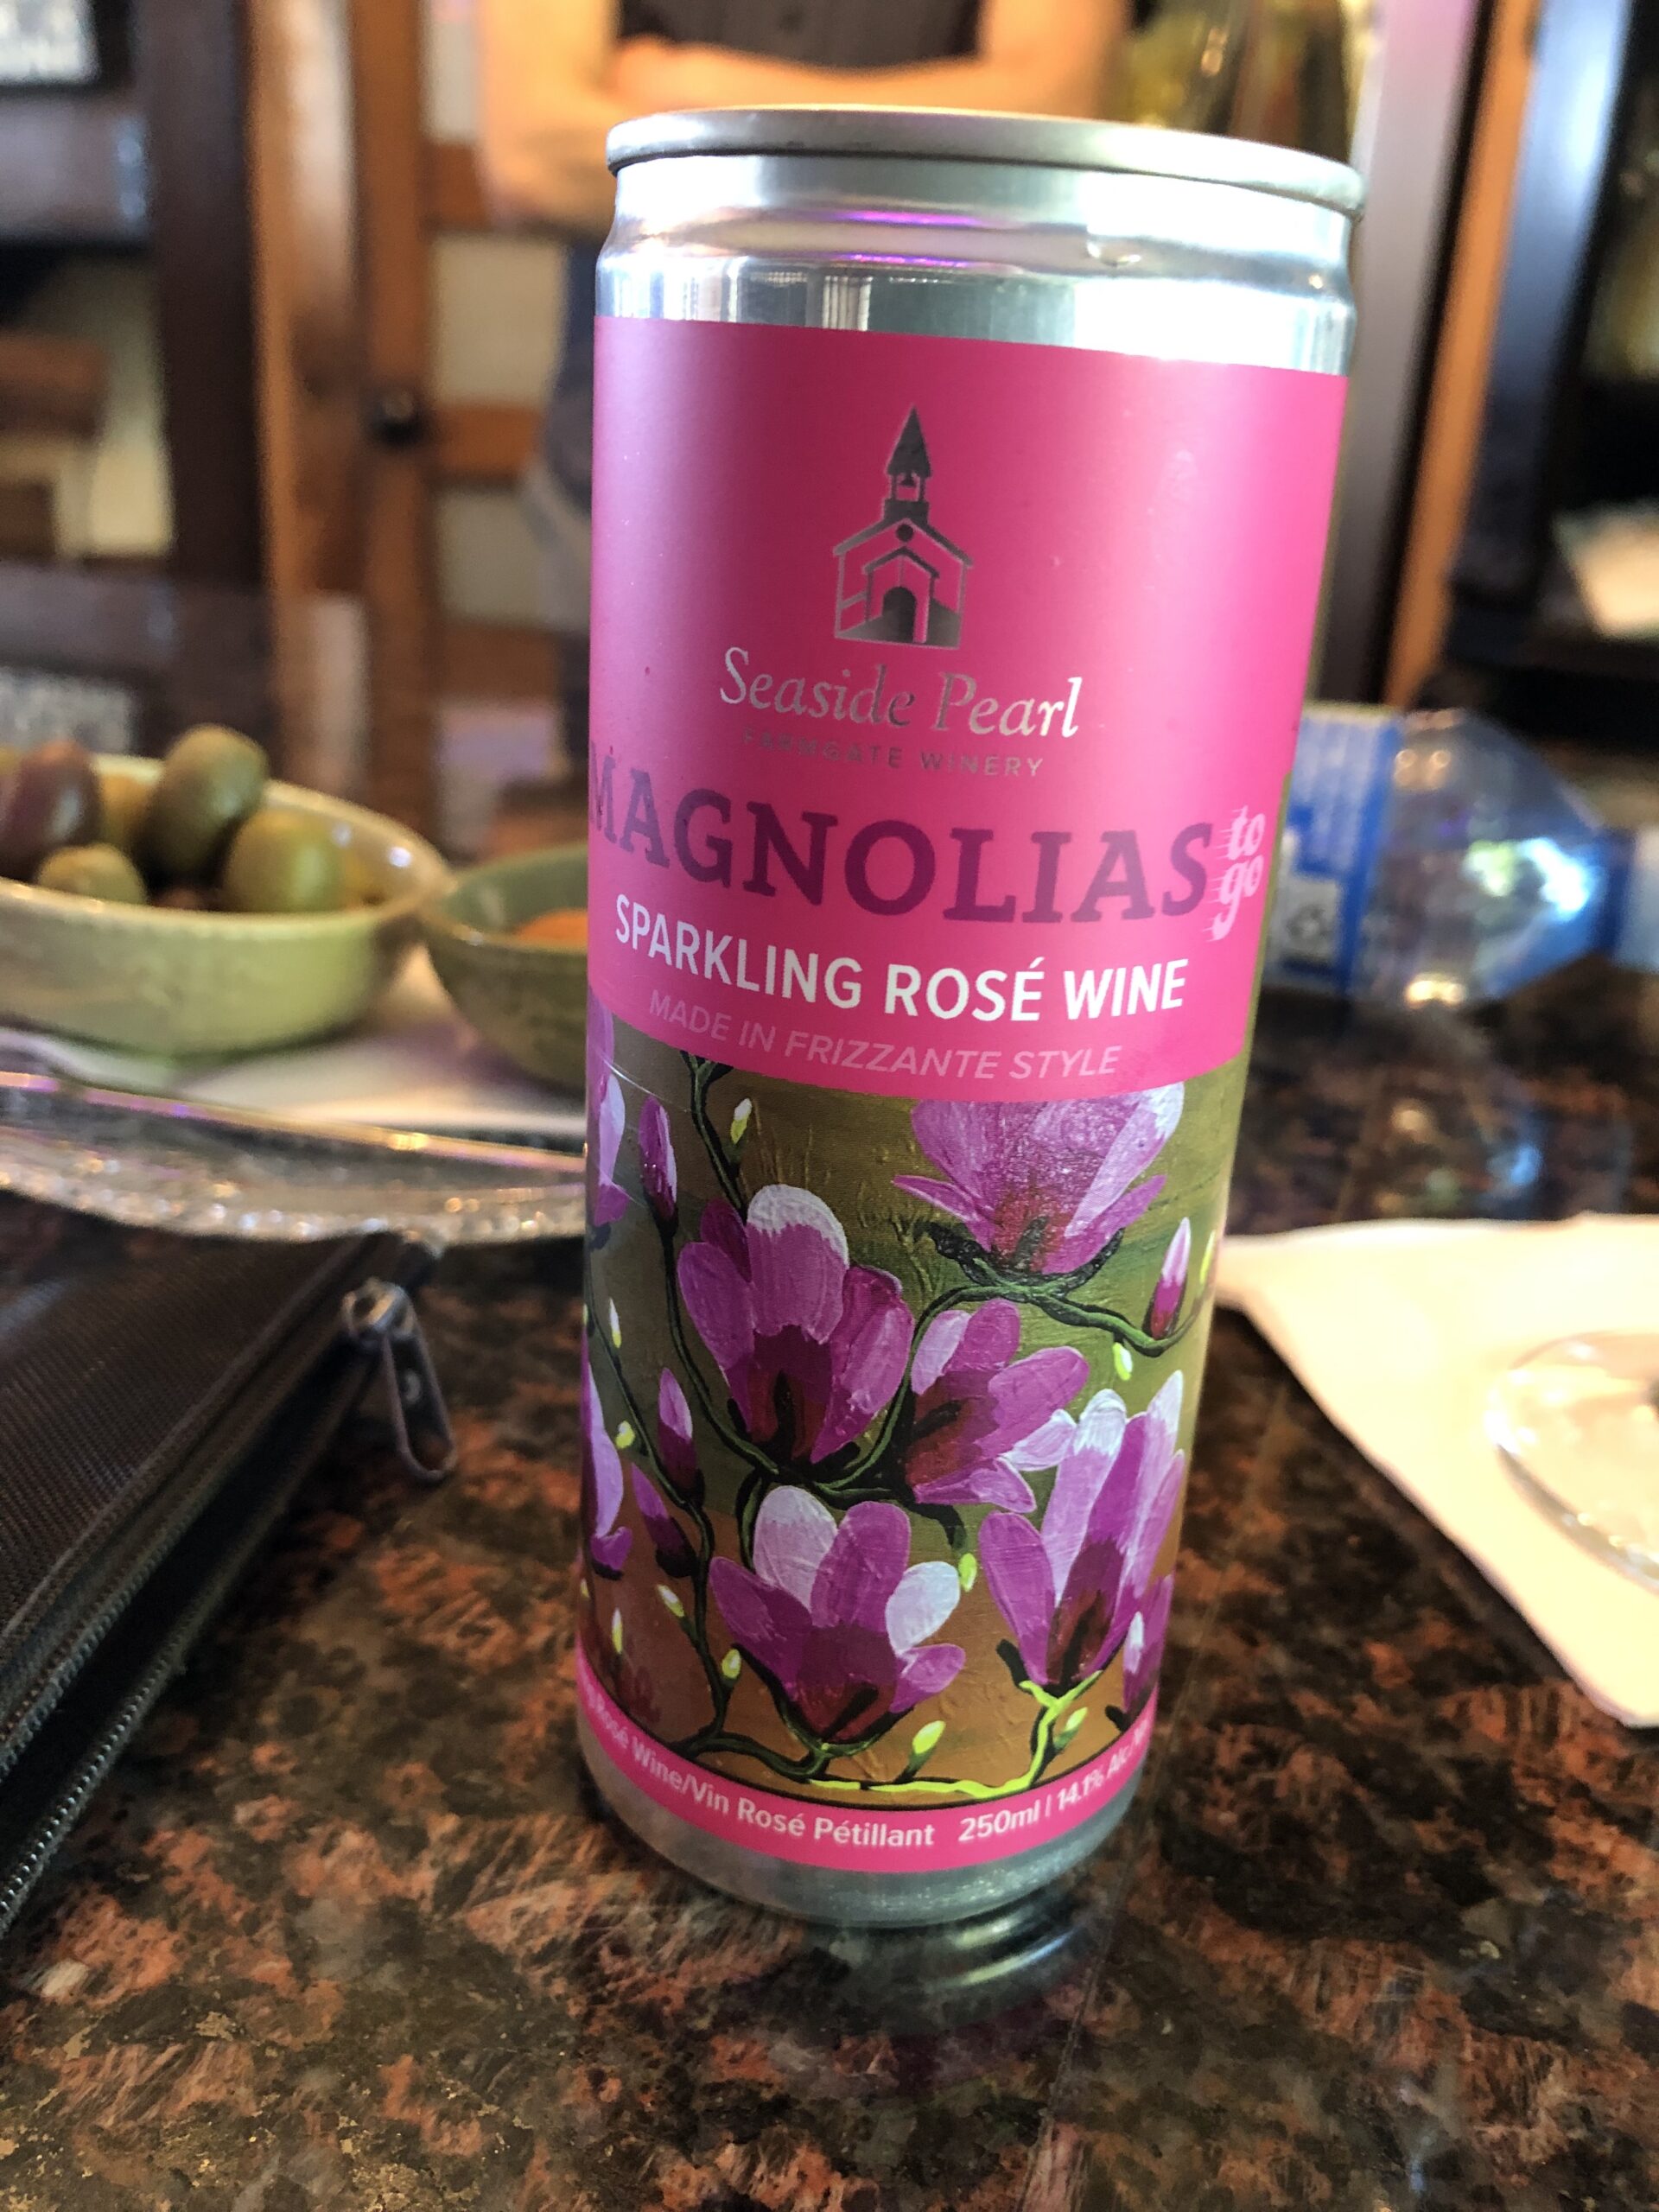 Featured image for “Canned wine, good or bad?”